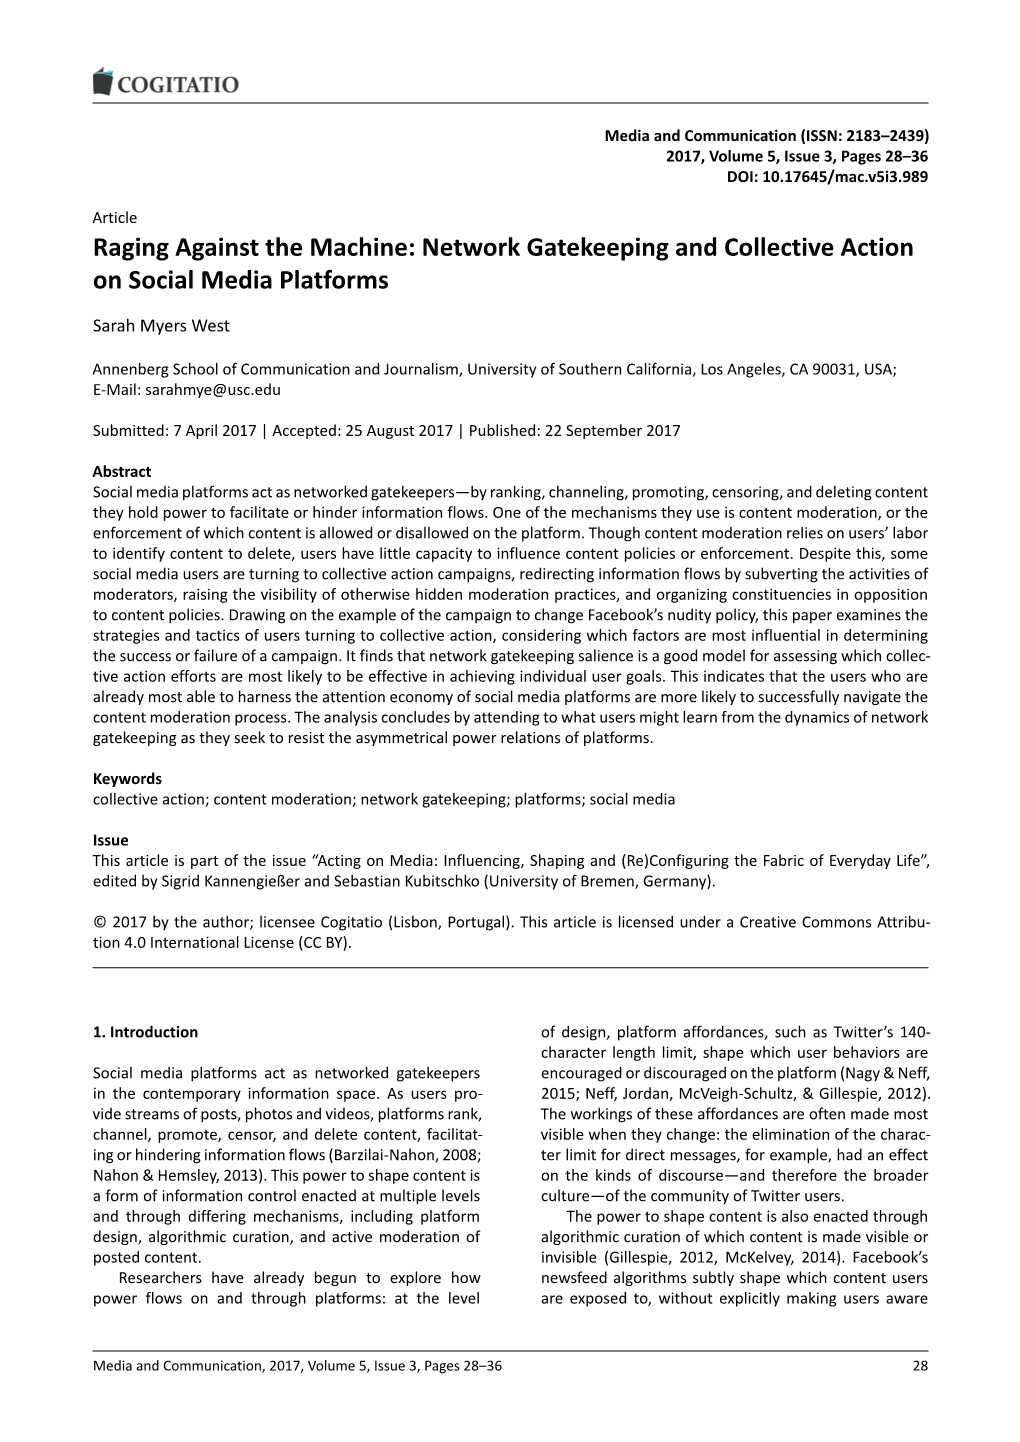 Network Gatekeeping and Collective Action on Social Media Platforms